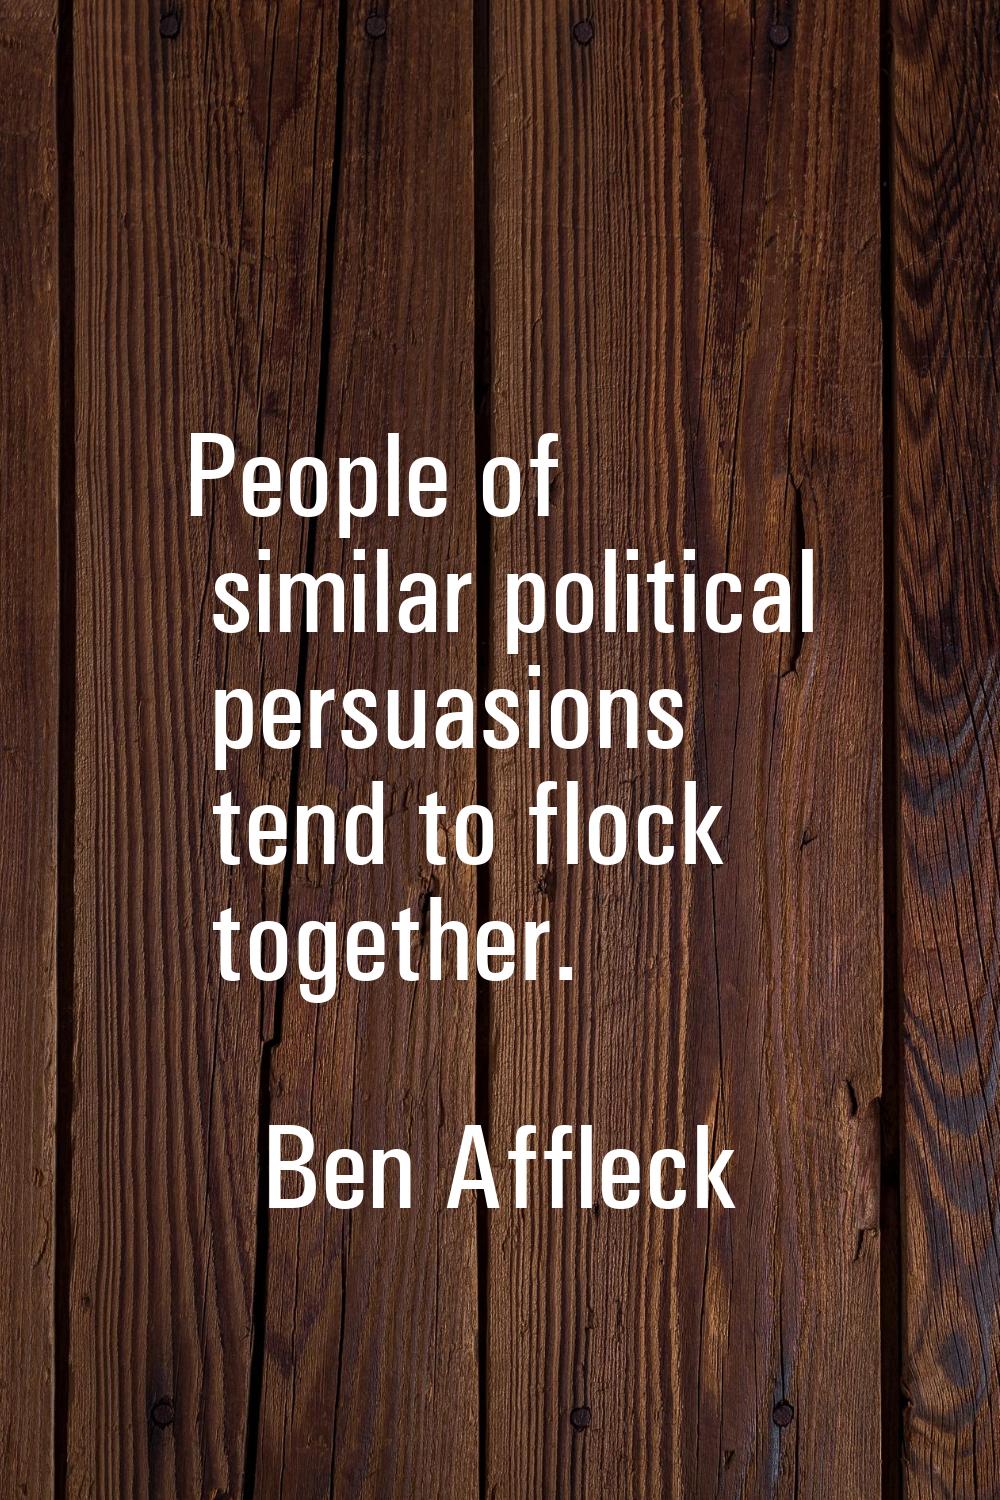 People of similar political persuasions tend to flock together.